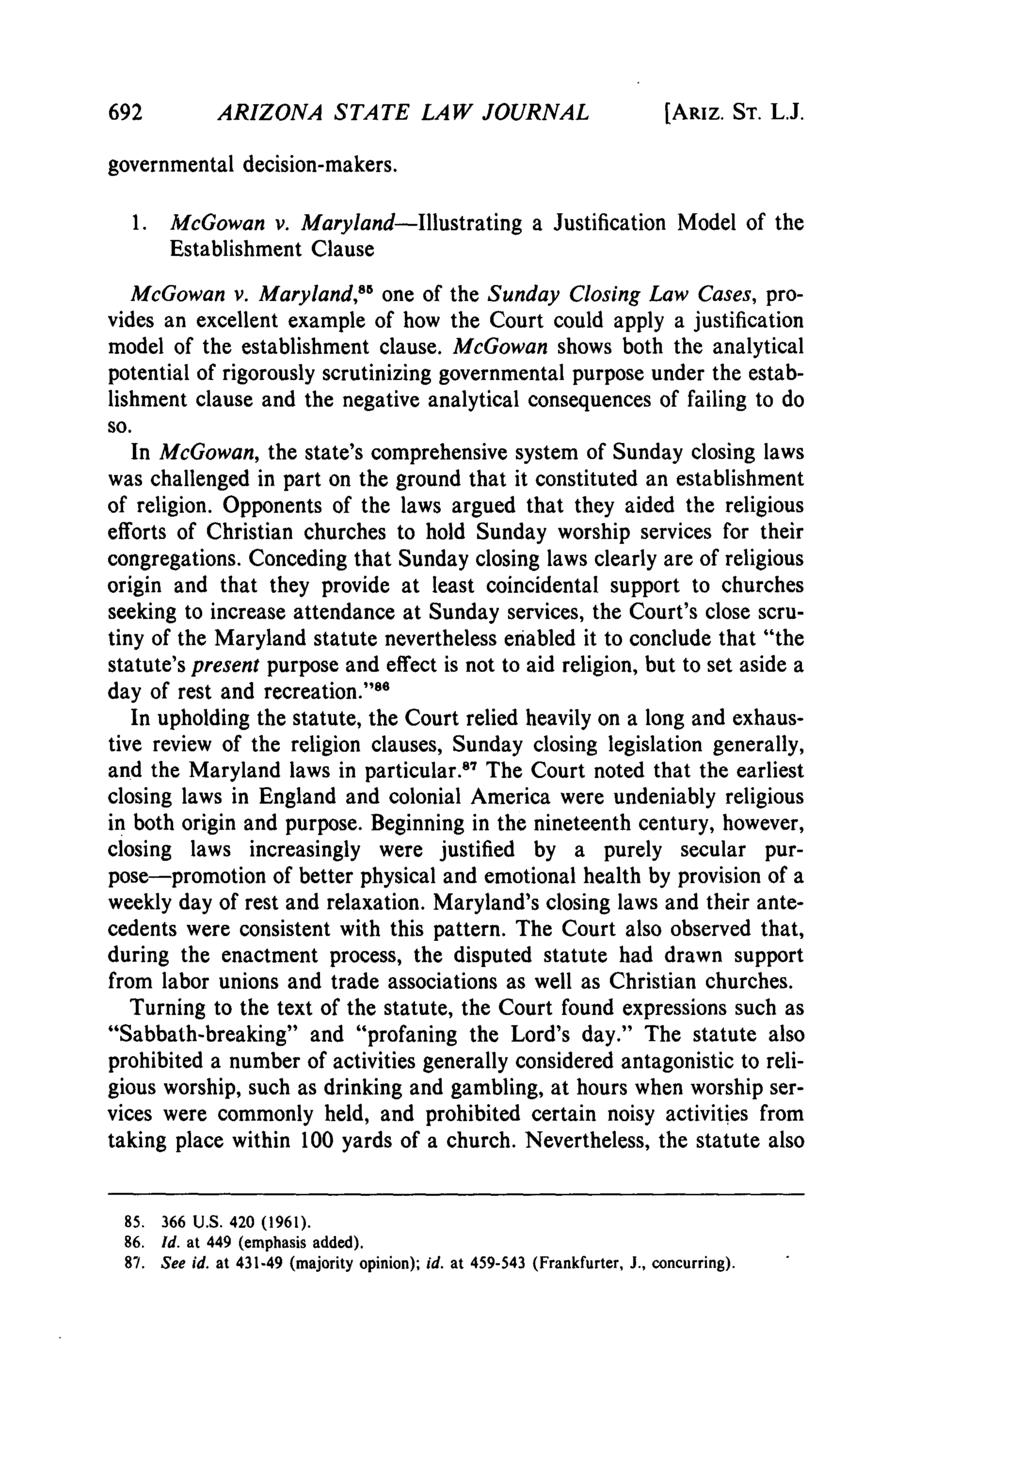 ARIZONA STATE LAW JOURNAL [ARIZ. ST. L.J. governmental decision-makers. 1. McGowan v. Maryland-Illustrating a Justification Model of the Establishment Clause McGowan v.